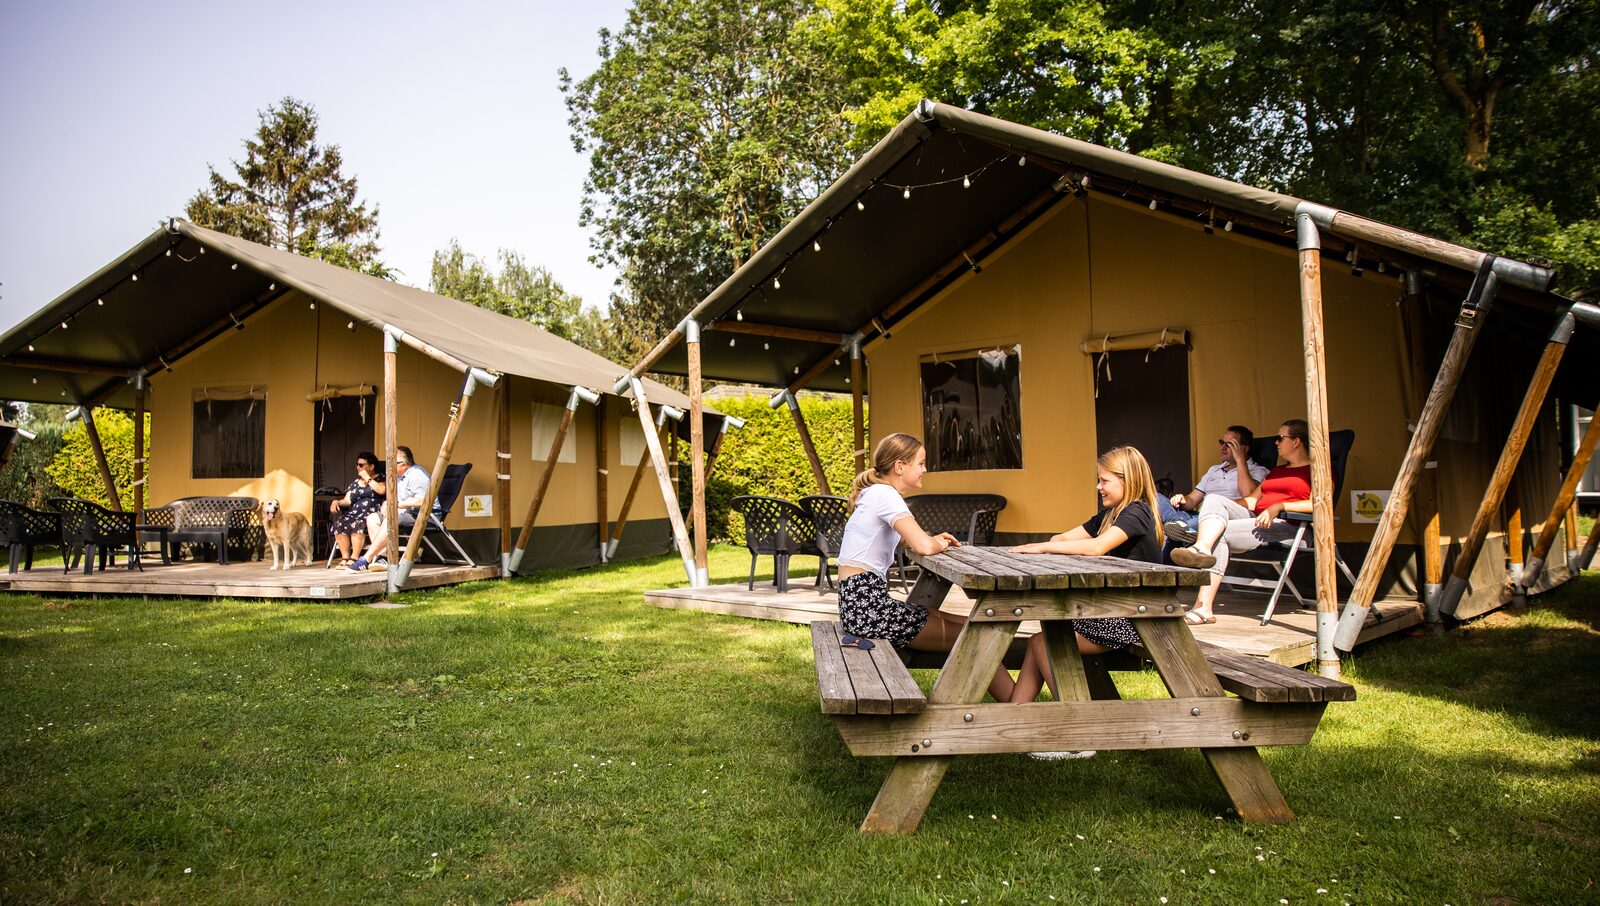 Experience the glamping feeling